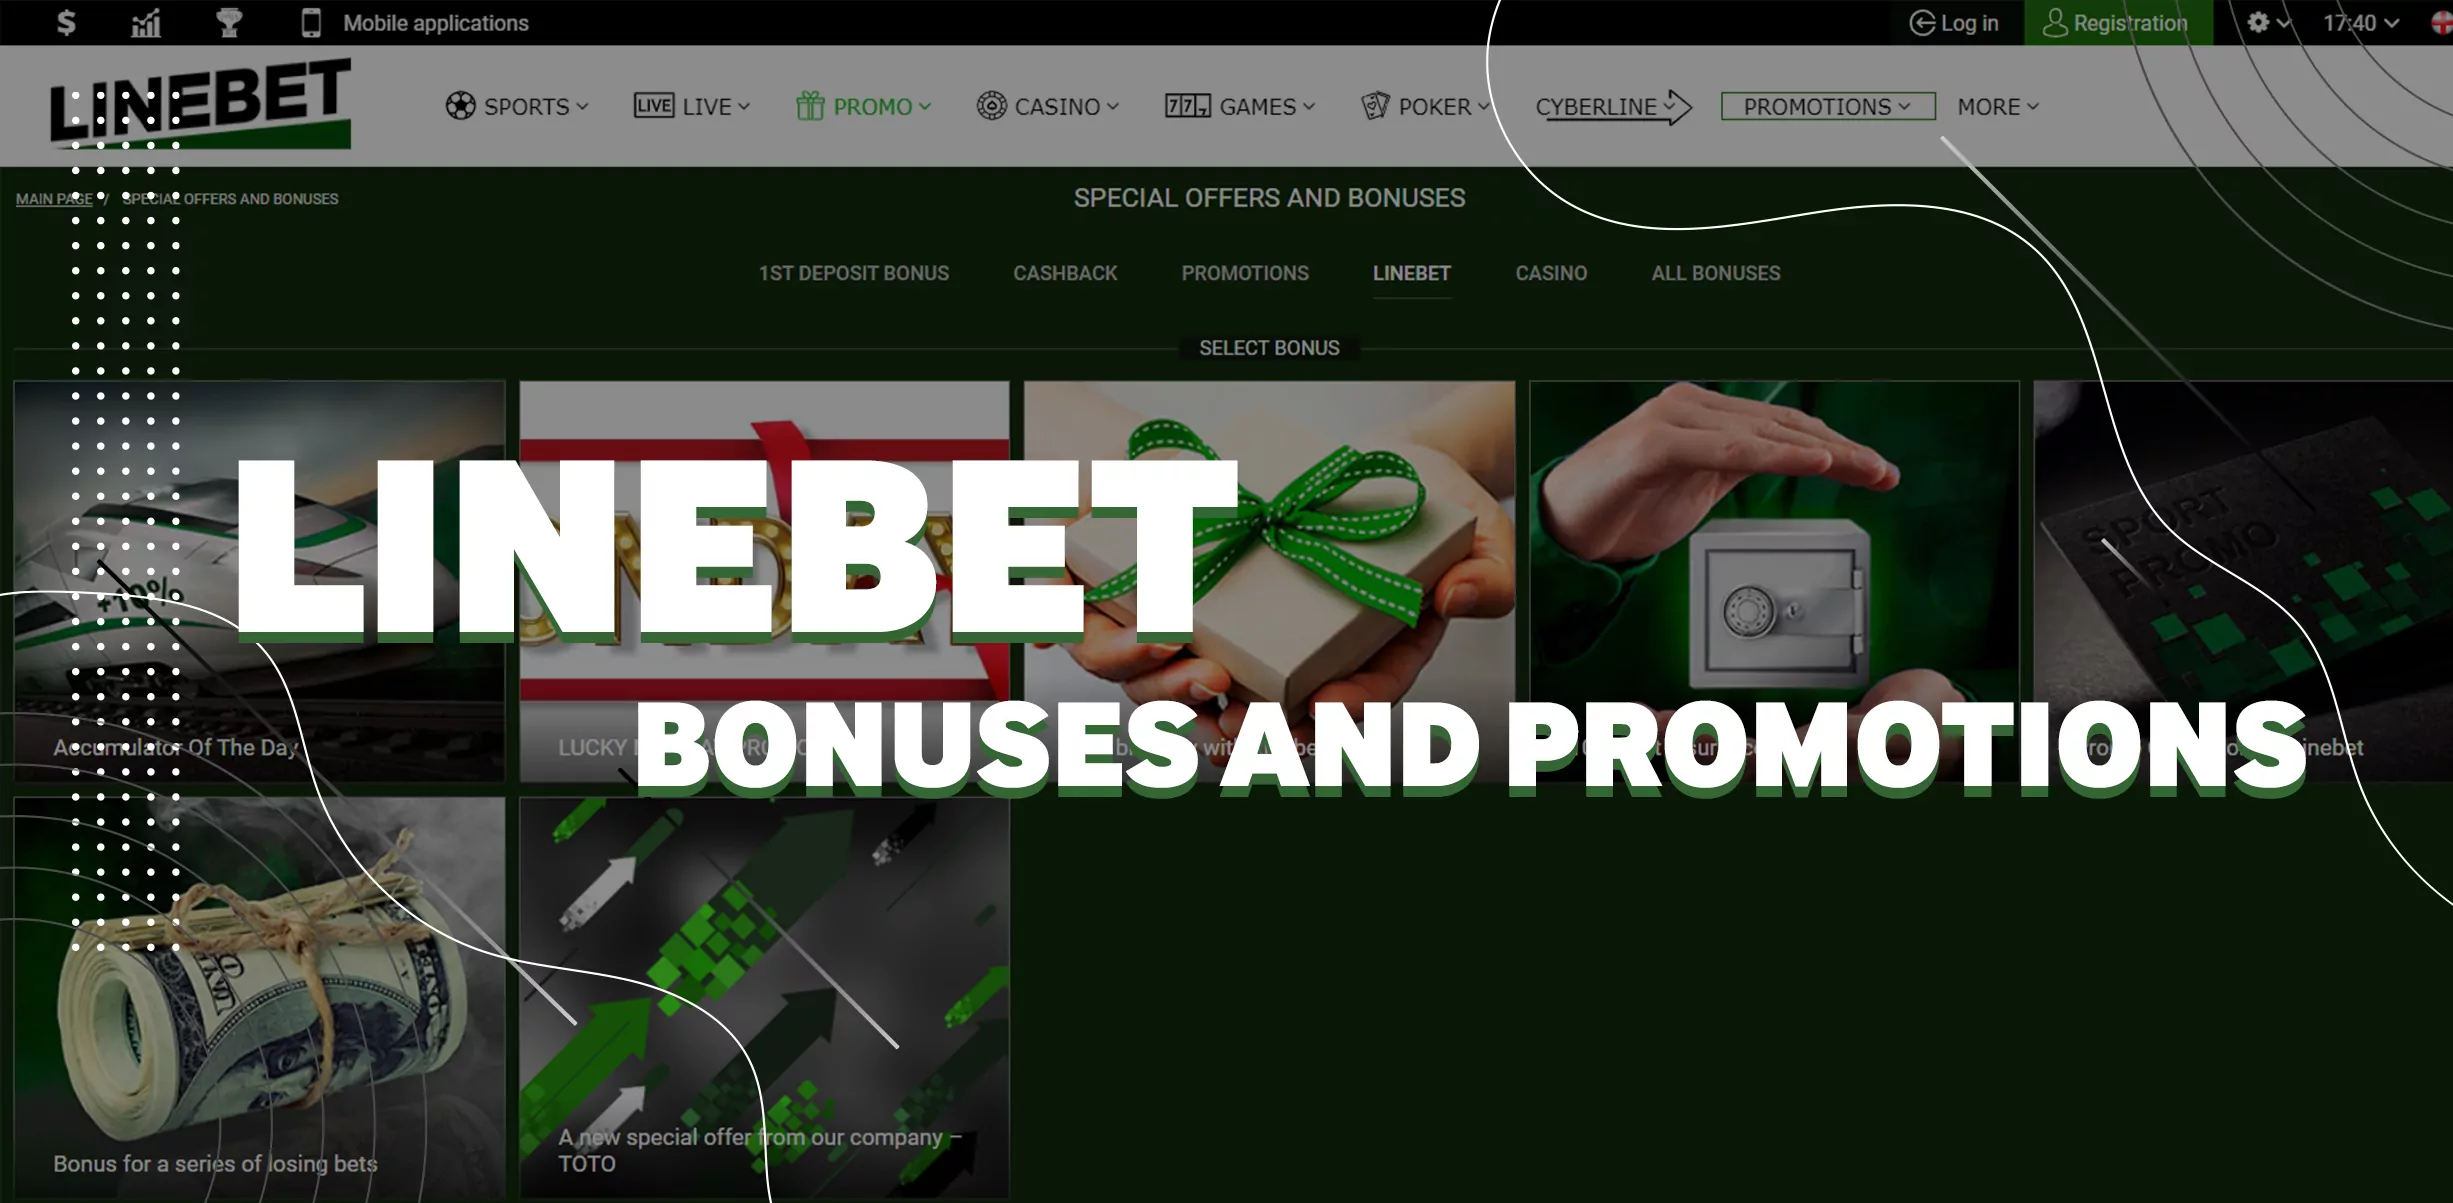 linebet online bonuses and promotions for Bangladesh players